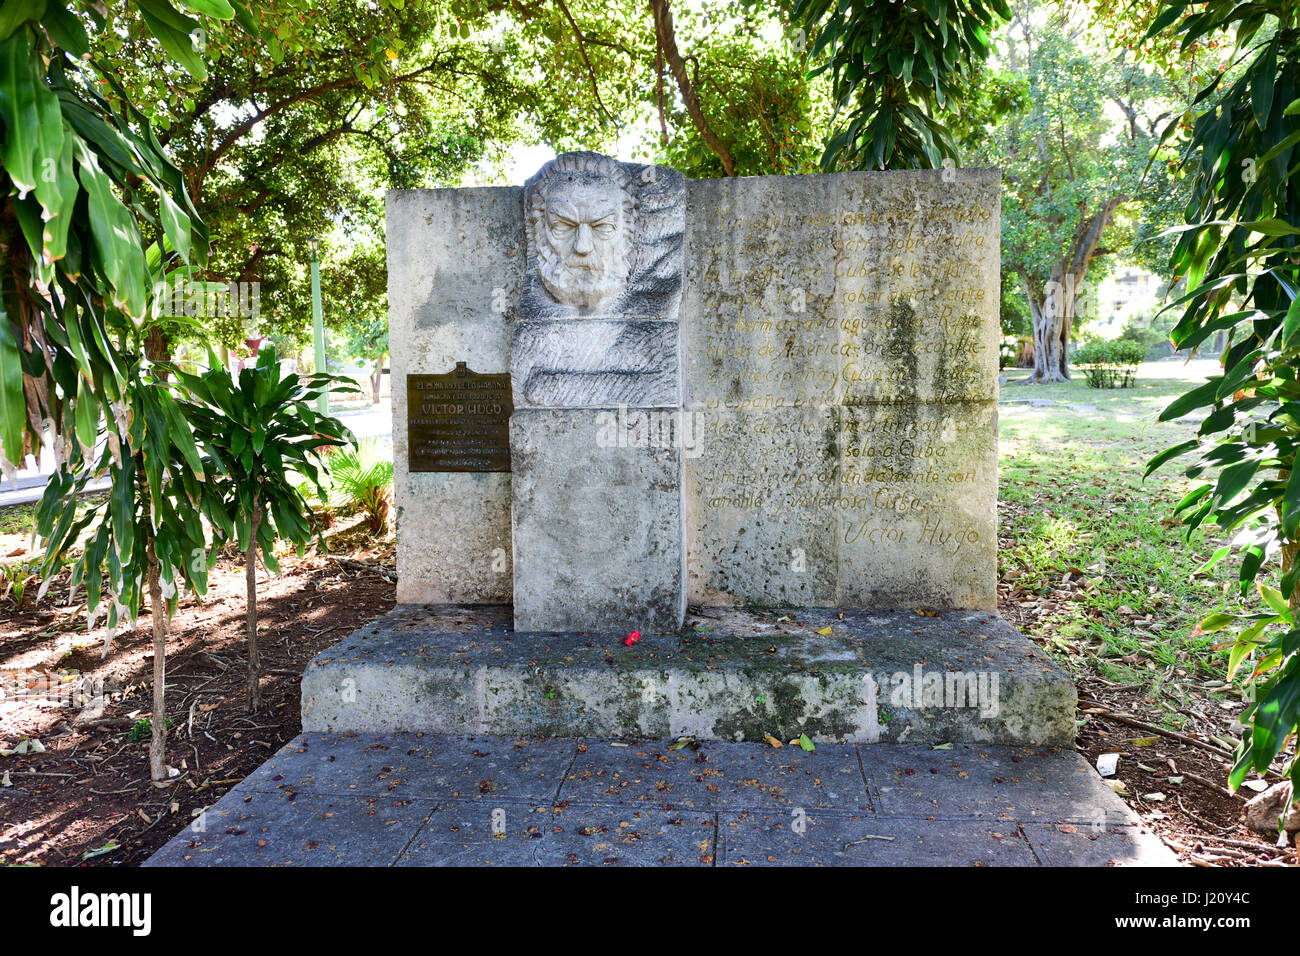 Victor Hugo Park and the monument in his memory surrounded by ceiba trees in Havana, Cuba. Stock Photo